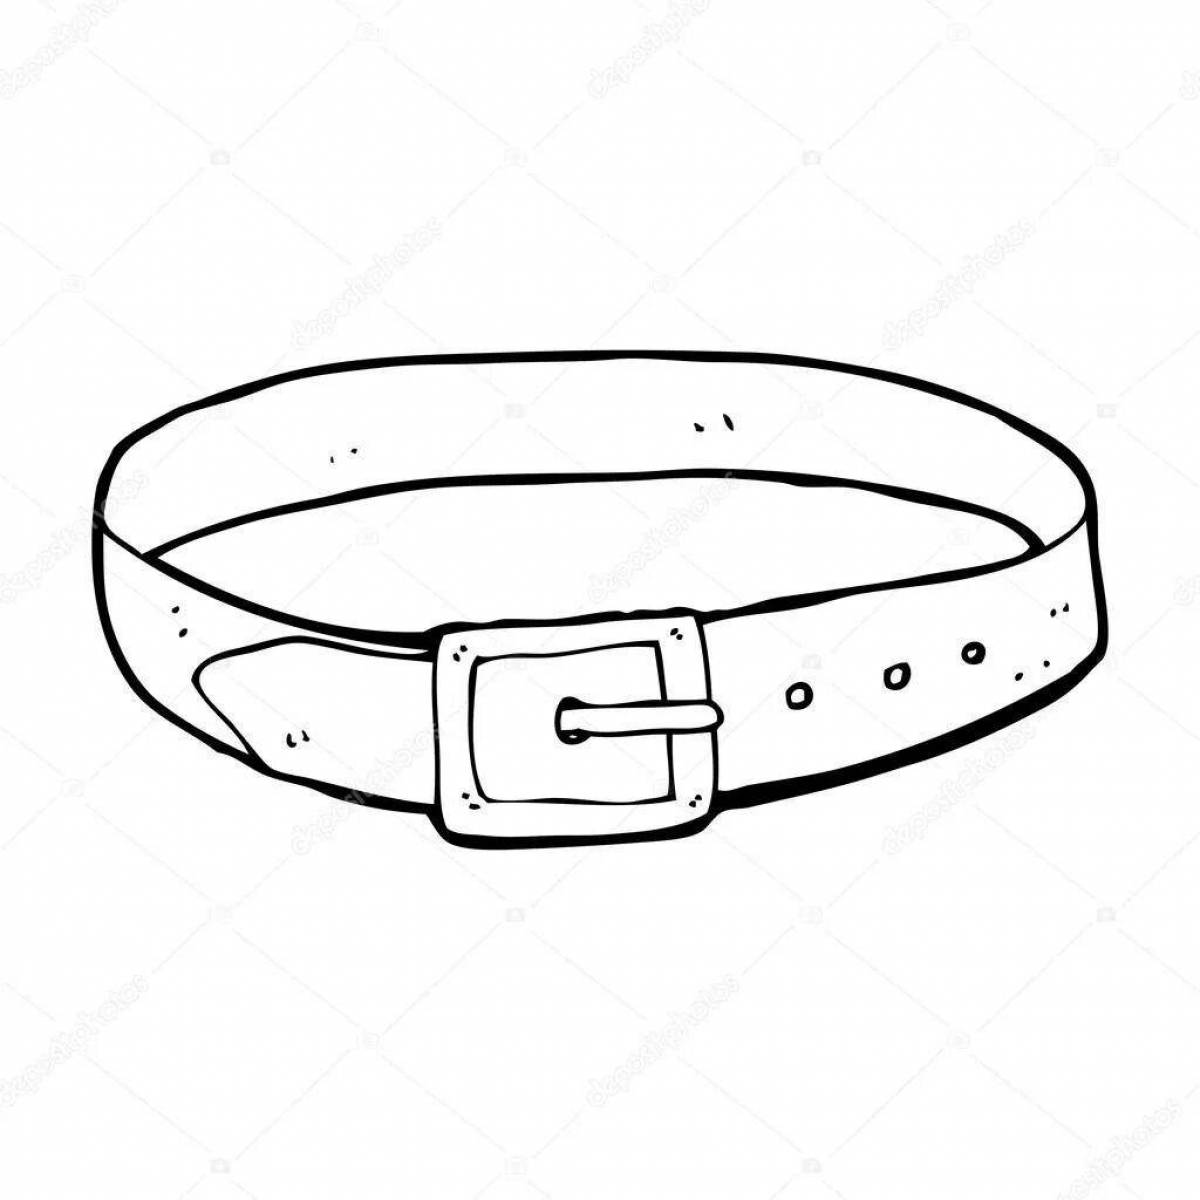 Colorful belt coloring page for kids